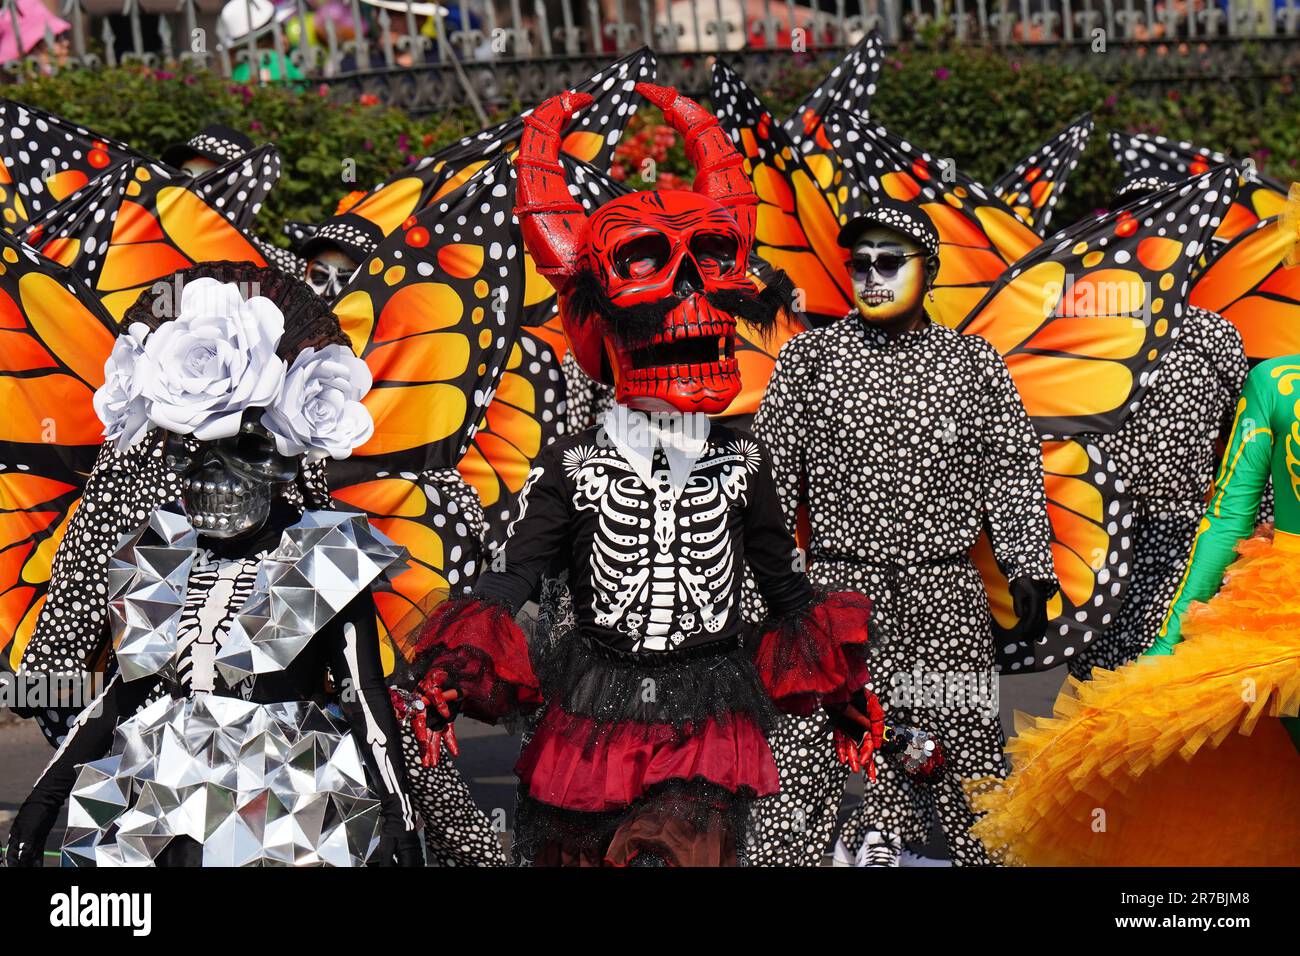 Performers costumed as skeletons and devils dance during the Grand Parade of the Dead to celebrate Dia de los Muertos holiday on Paseo de la Reforma, October 29, 2022 in Mexico City, Mexico. Stock Photo